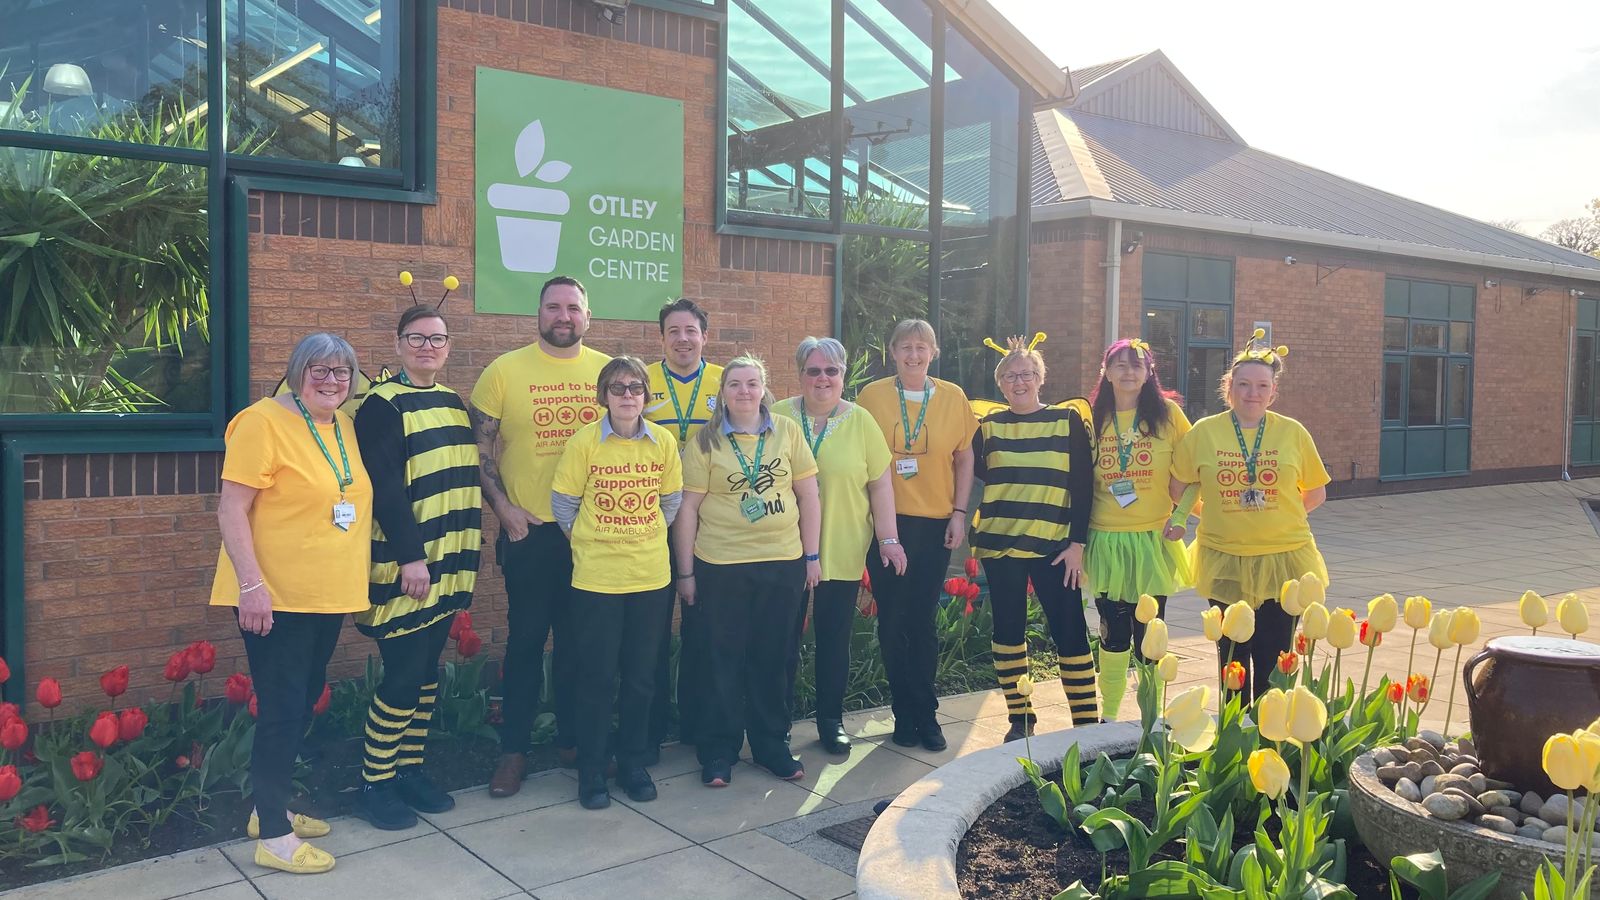 Yorkshire Air Ambulance is garden centre charity of the year